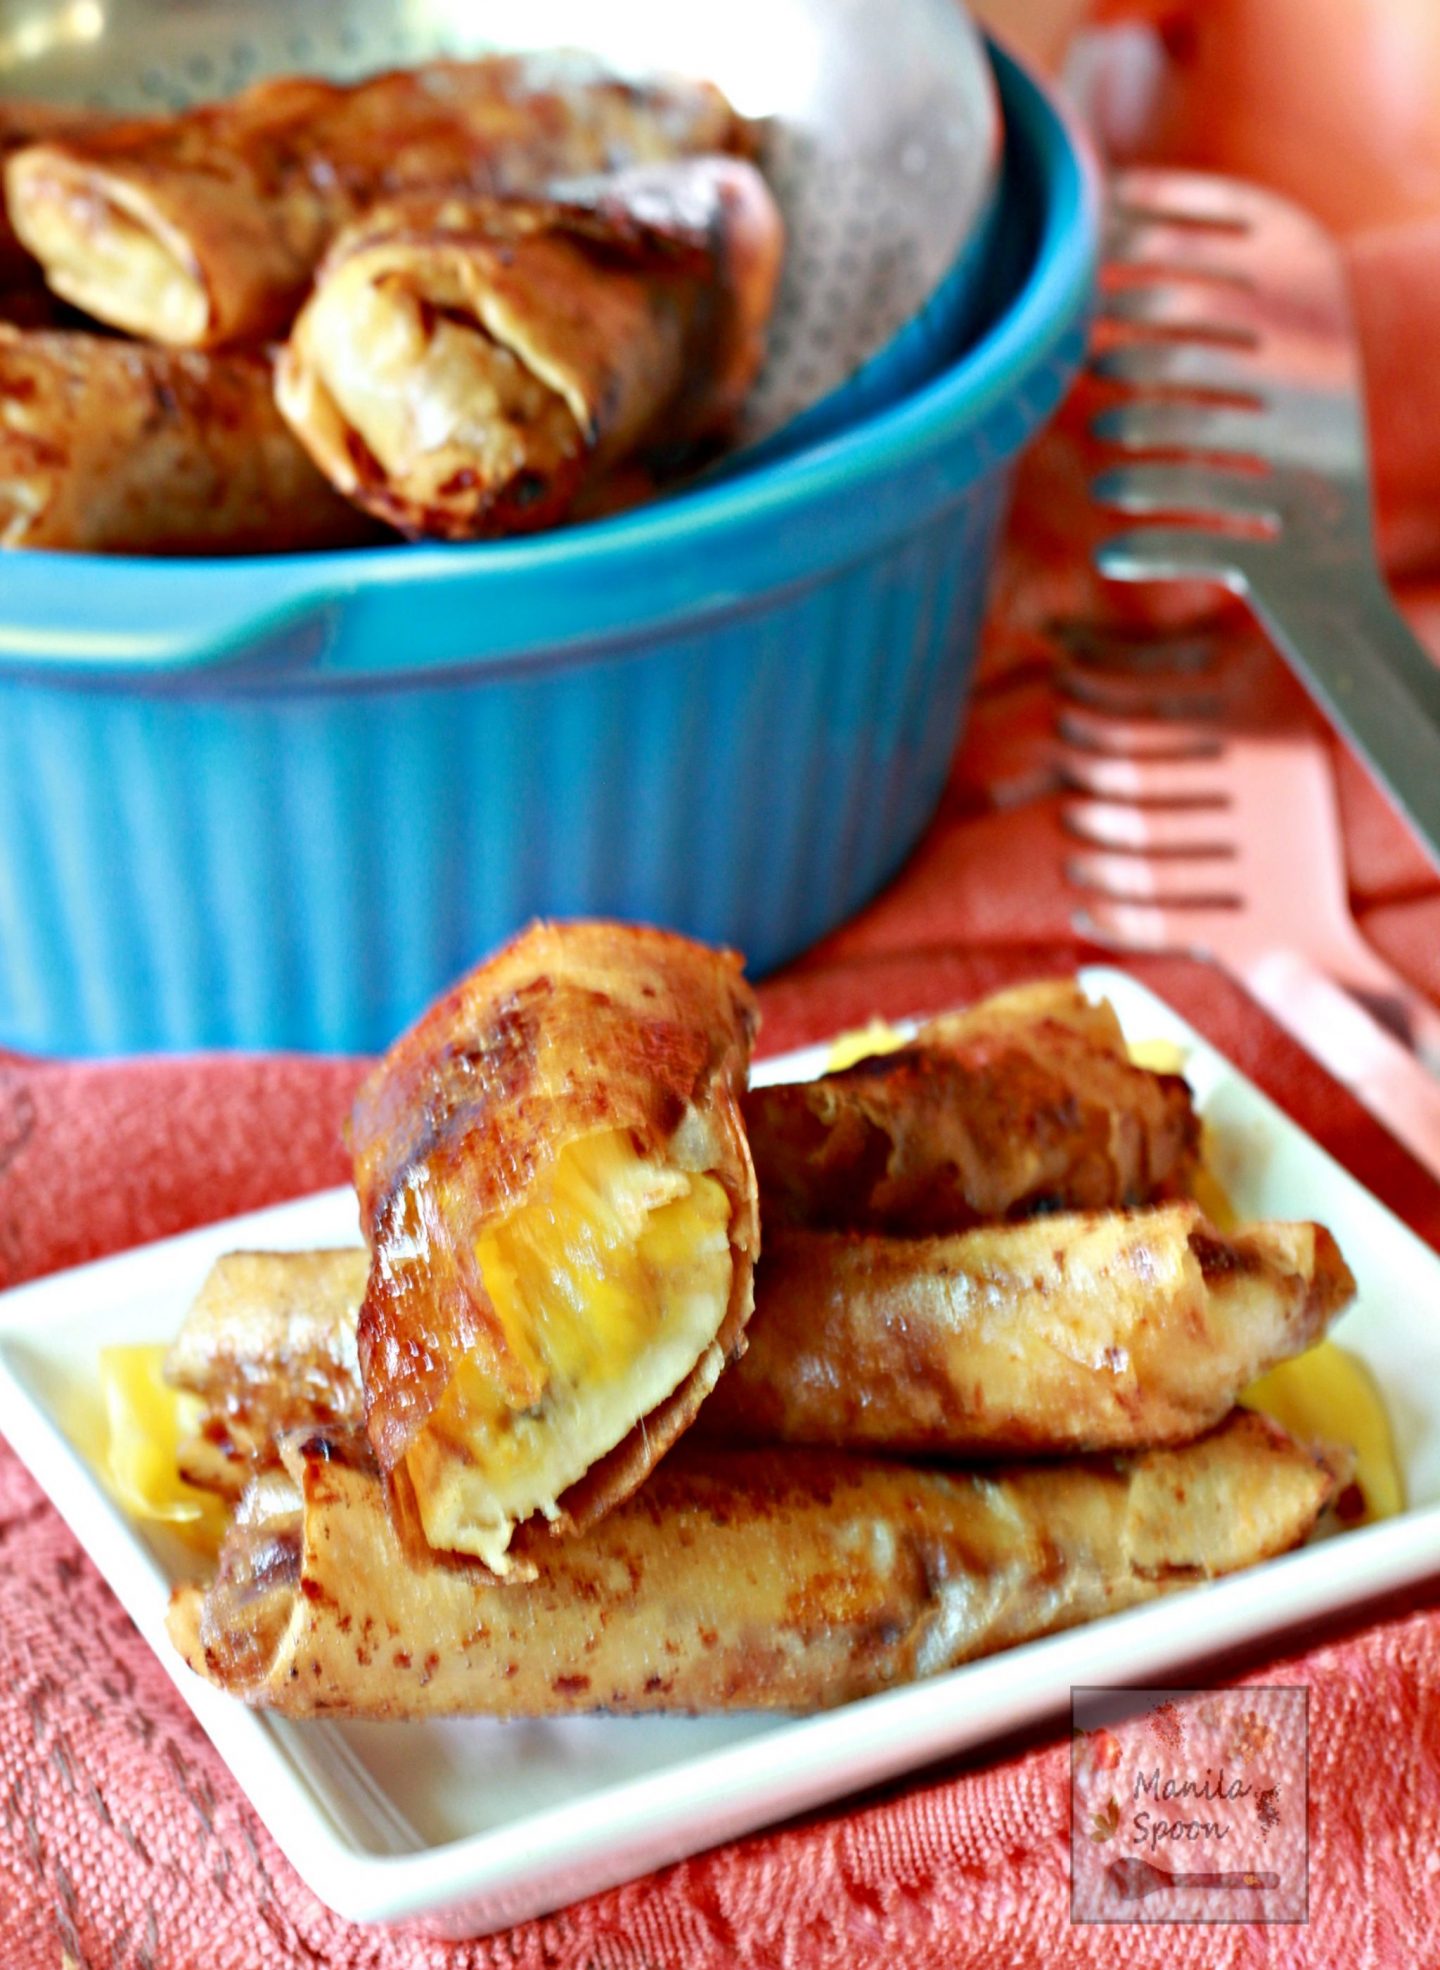 These Banana Spring Rolls or Lumpia - Turon - are the best way to use up all that ripe Bananas. Bananas are rolled in sugar and then wrap in spring roll wrappers with slices of jackfruit then cooked until perfectly crispy. This delicious caramelized Asian classic snack or dessert is a must-make. #turon #bananalumpia #bananaspringrolls #lumpia